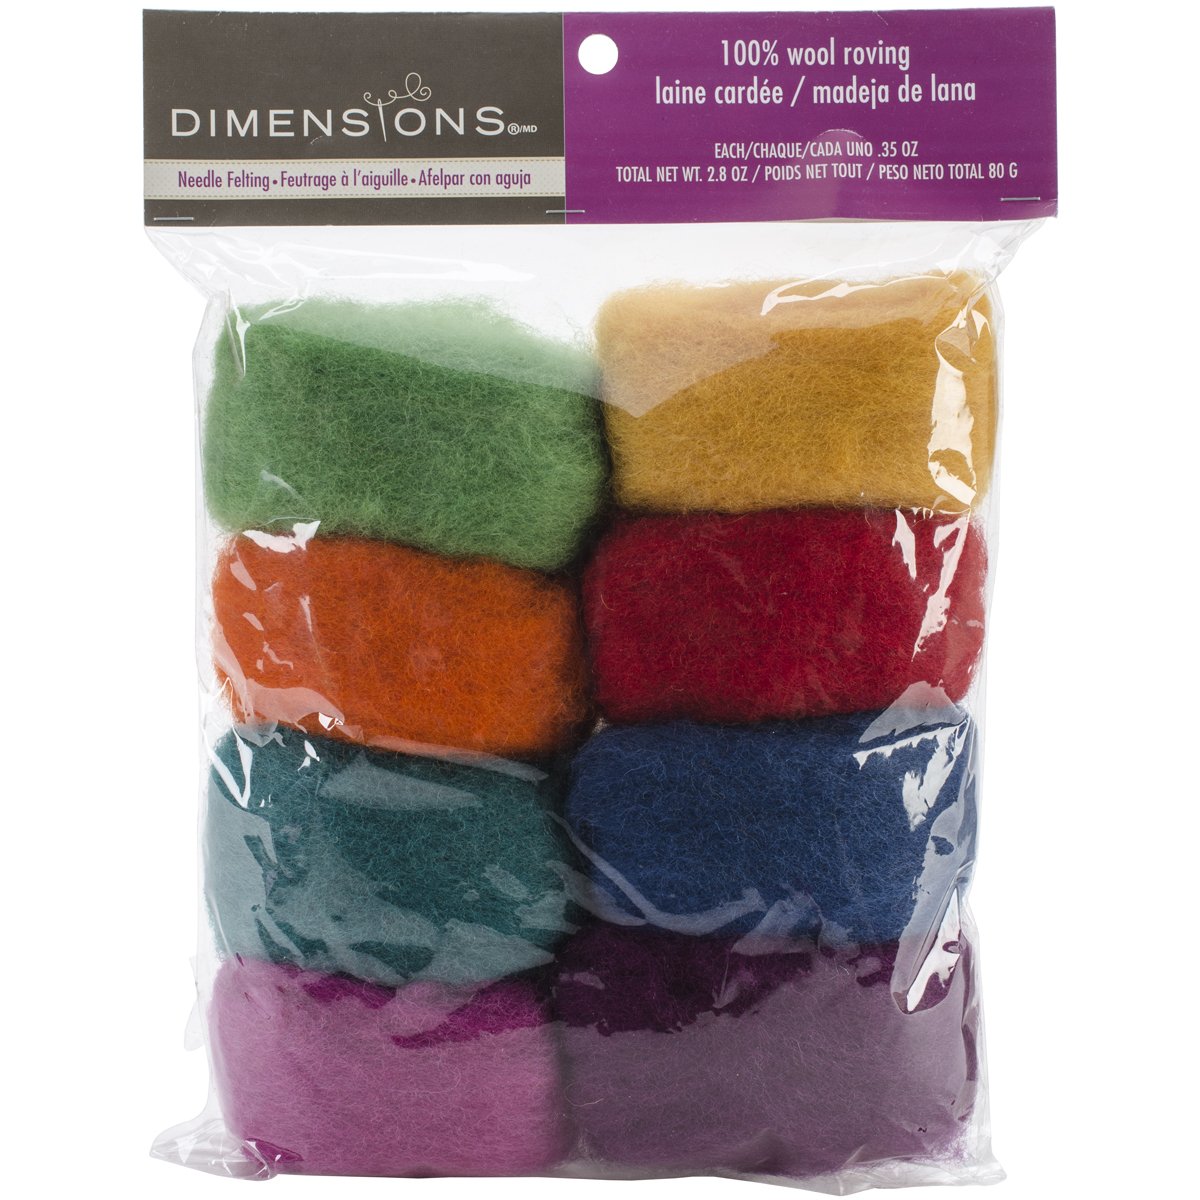 Dimensions Needlecrafts Rainbow Wool Roving for Needle Felting, 8 pack, 80g